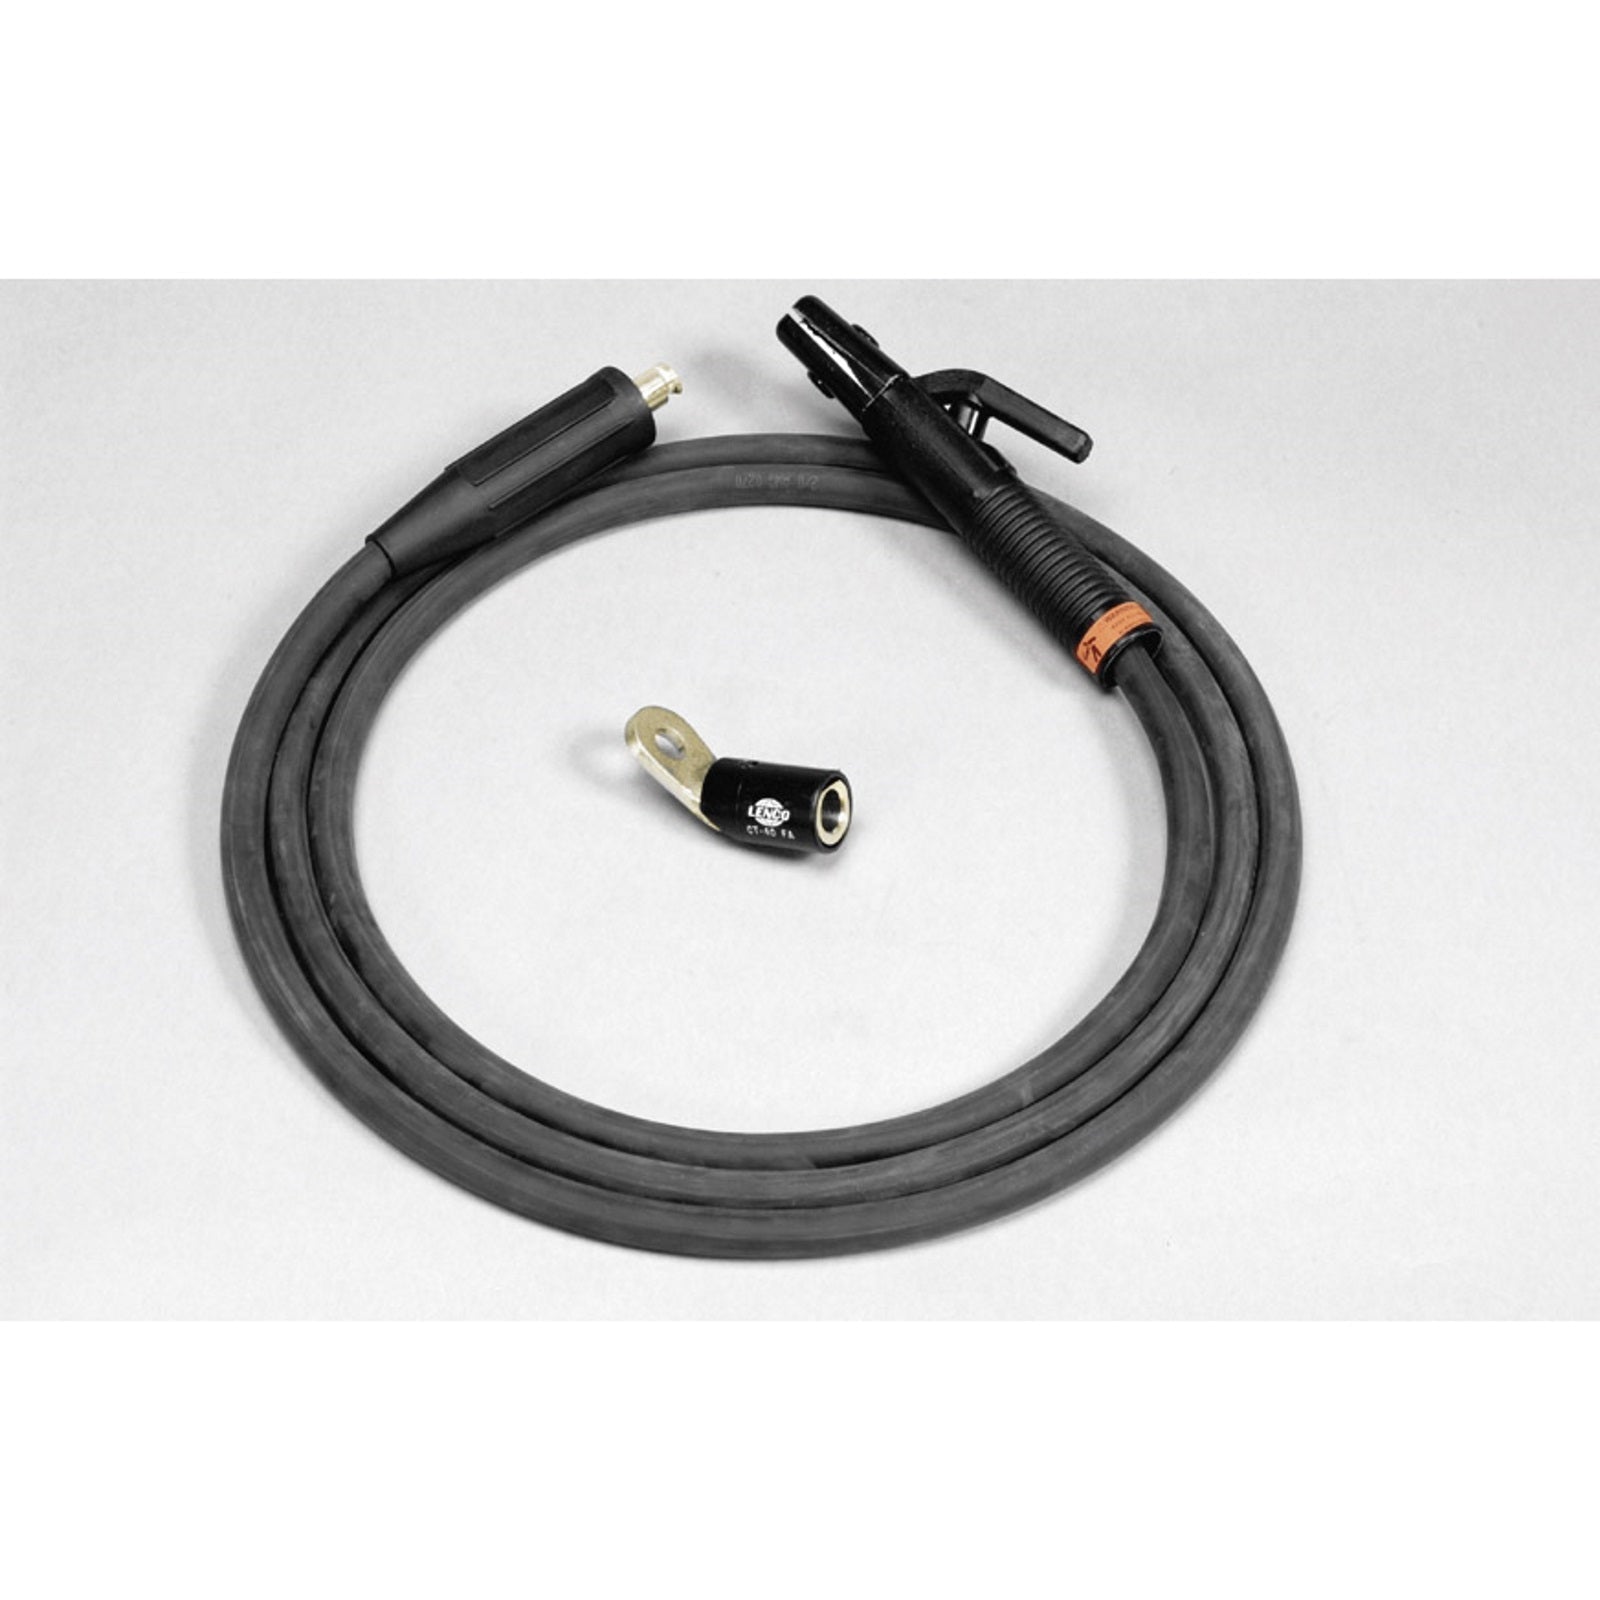 Miller 10' Weld Cable with Electrode Holder (195457)